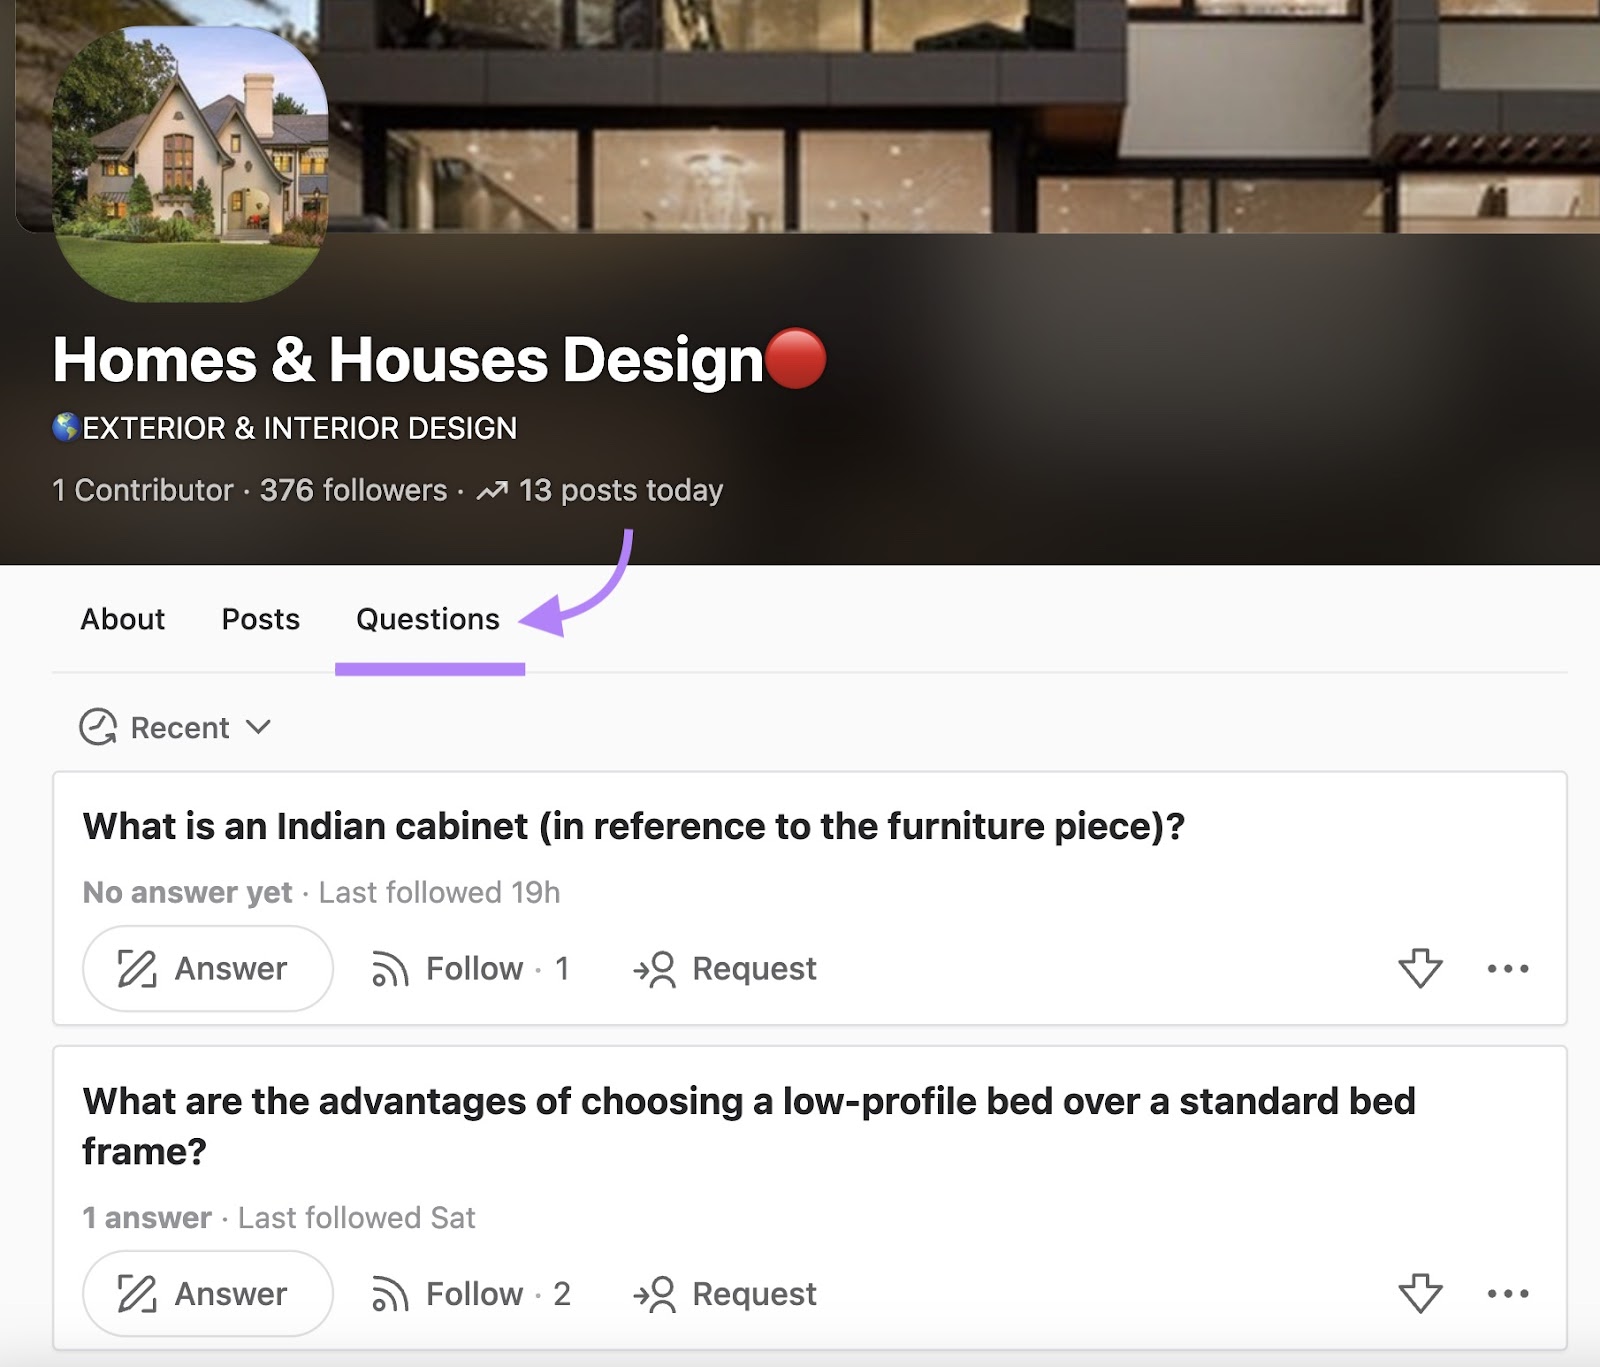 "Questions" tab highlighted under "Homes & Houses Design" space in Quora